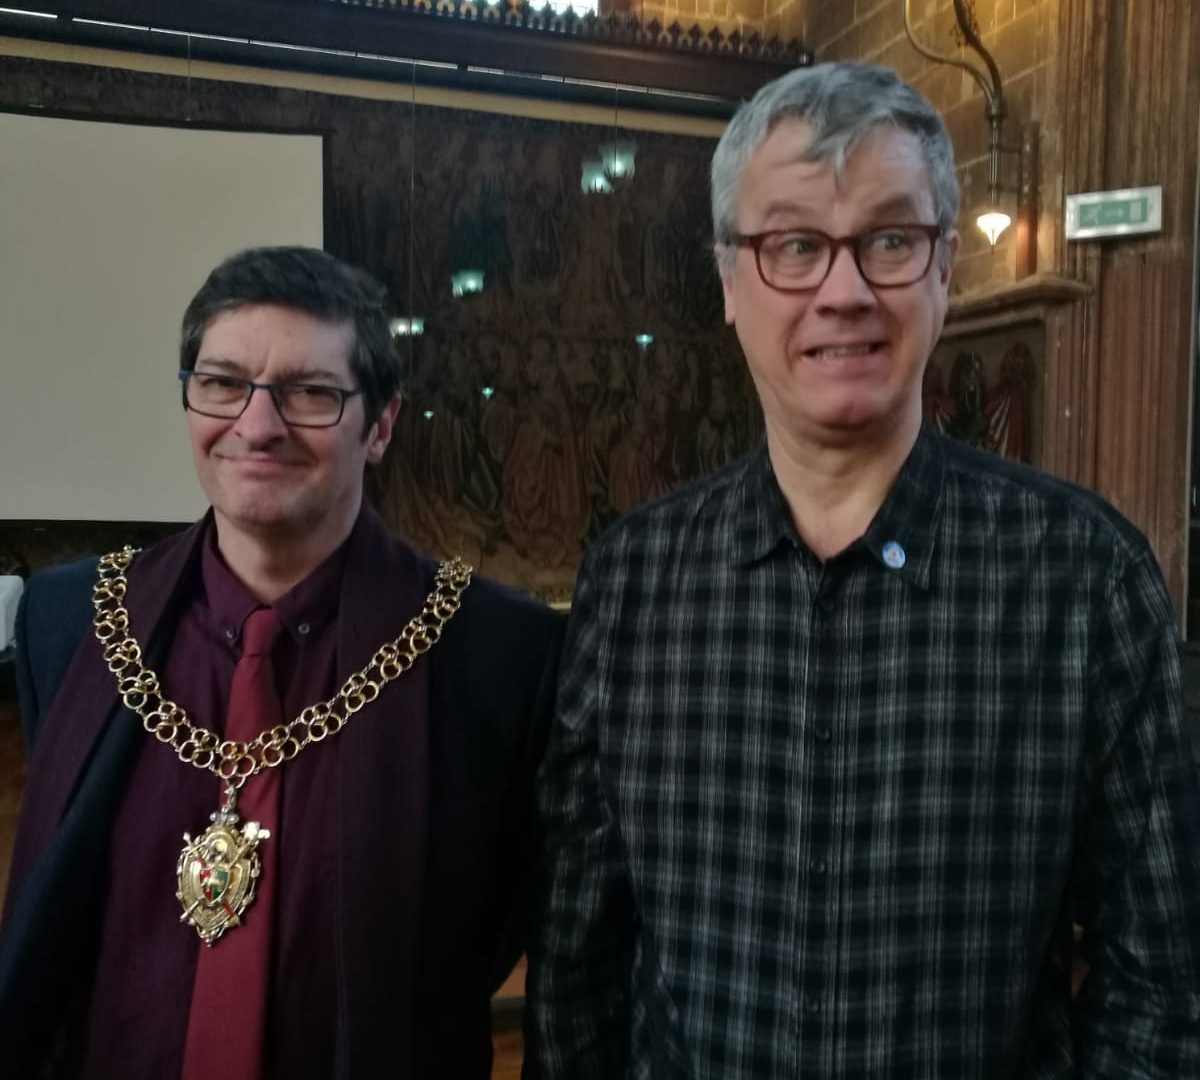 Bill with the Mayor of Coventry